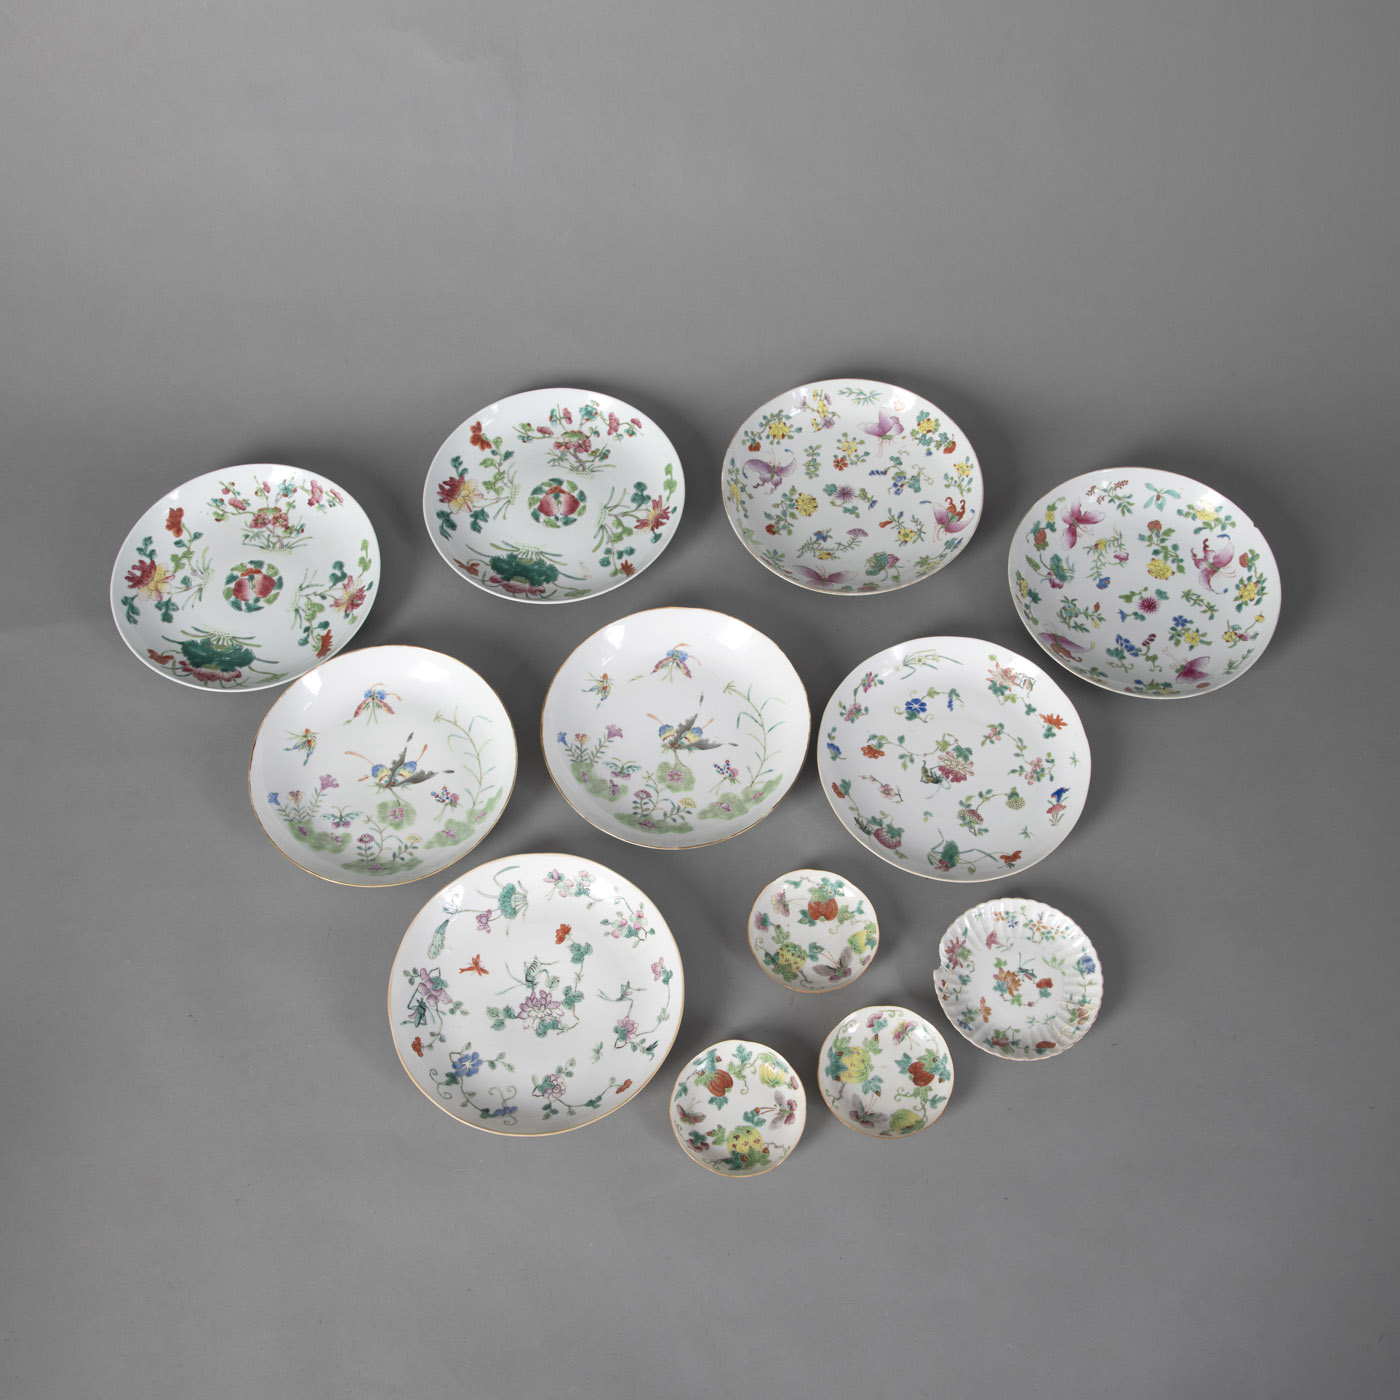 <b>A GROUP OF TWELVE 'FAMILLE ROSE' PORCELAIN PLATES AND BOWLS WITH BUTTERFLY, FLOWER AND FRUIT DECORATION</b>